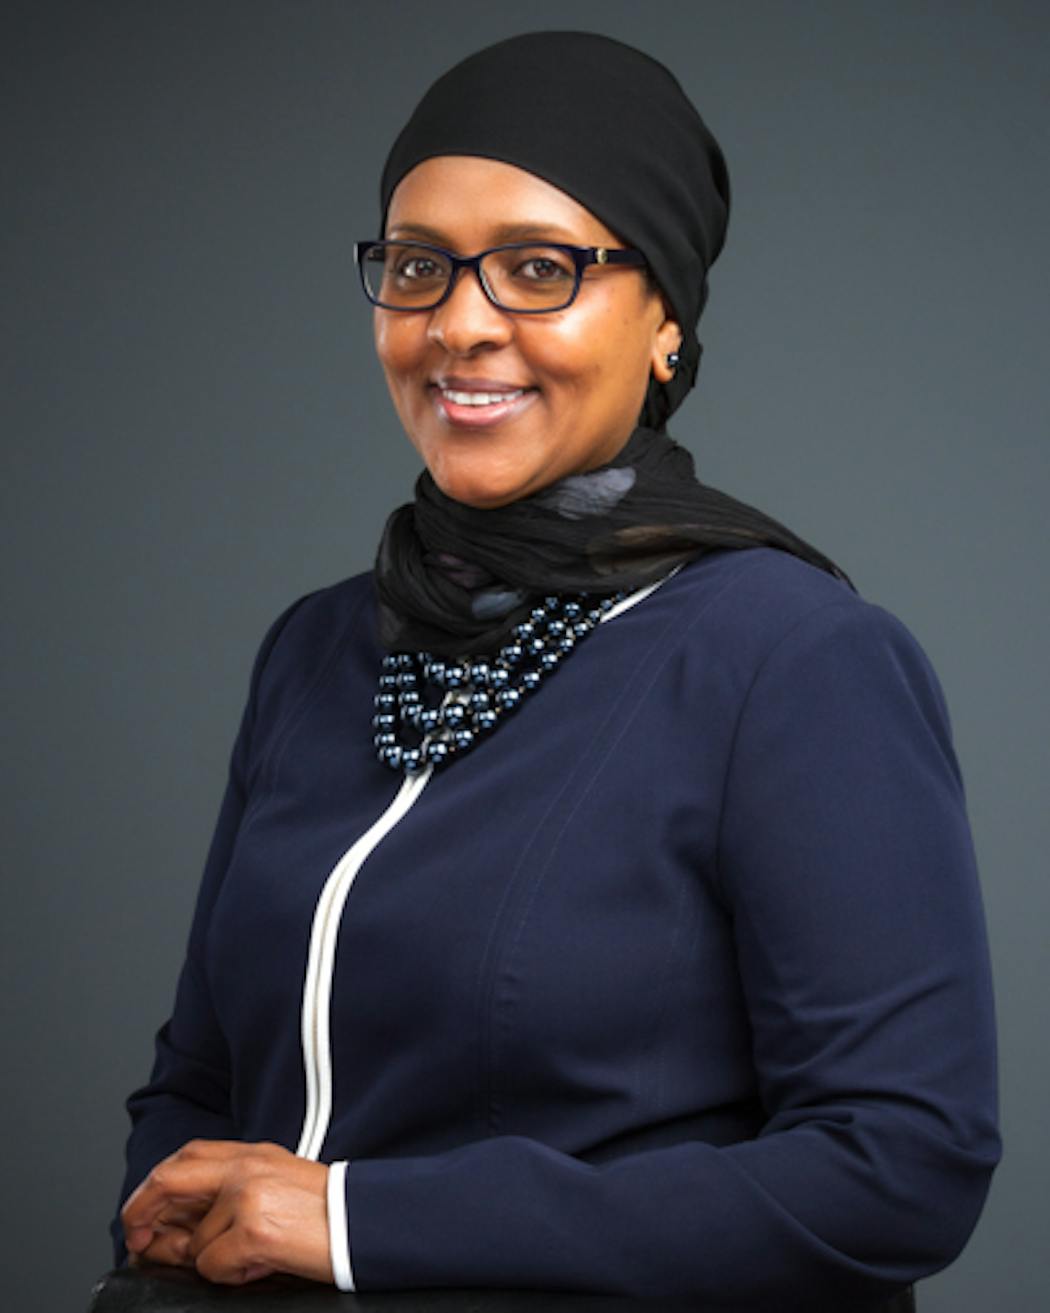 Fartun Weli is CEO of Isuroon, an organization that helps East African women and families.